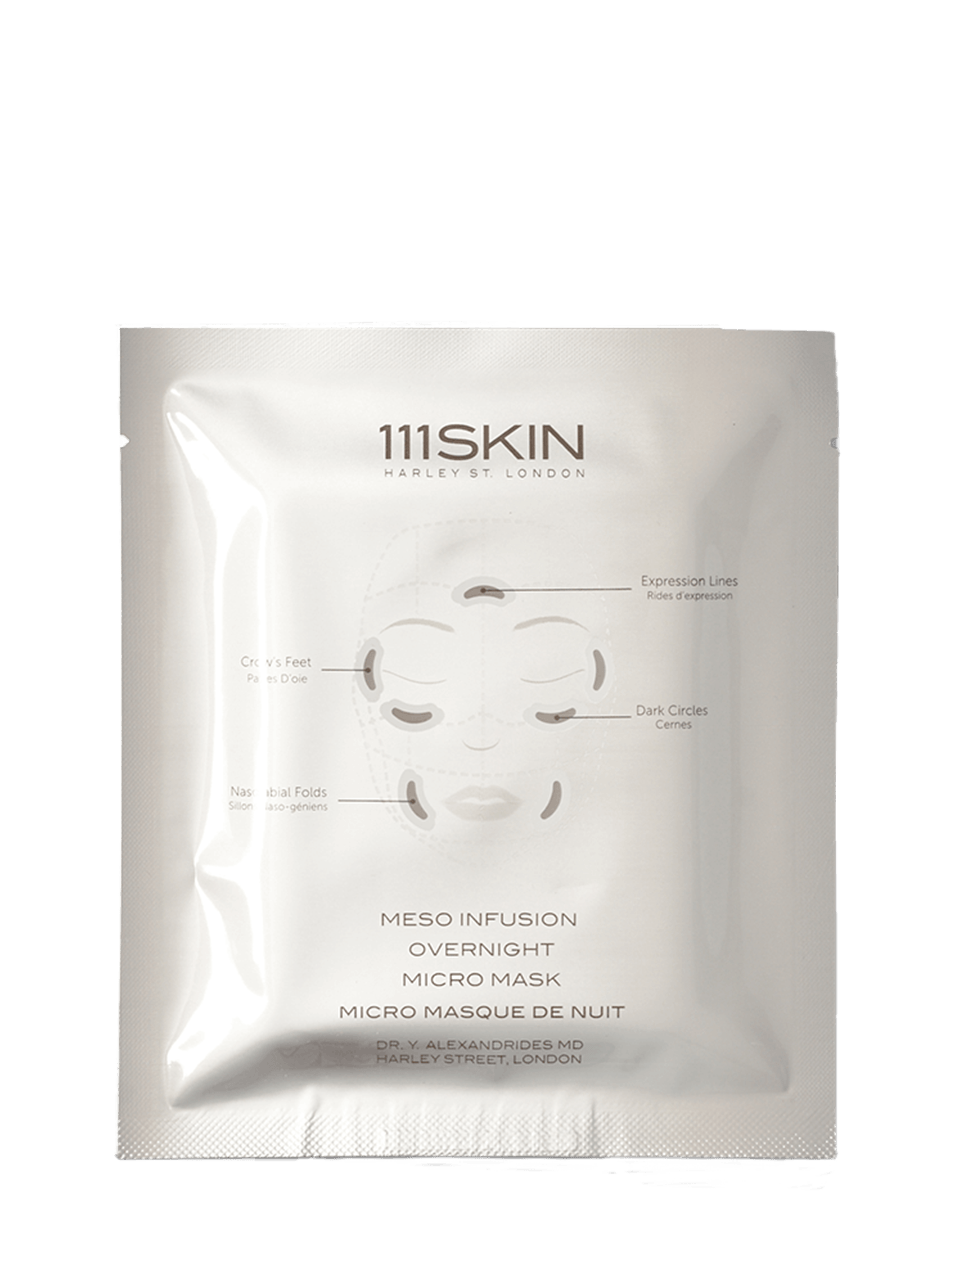 Meso Infusion Overnight Micro Mask SKINCARE 111Skin 1-Pack 